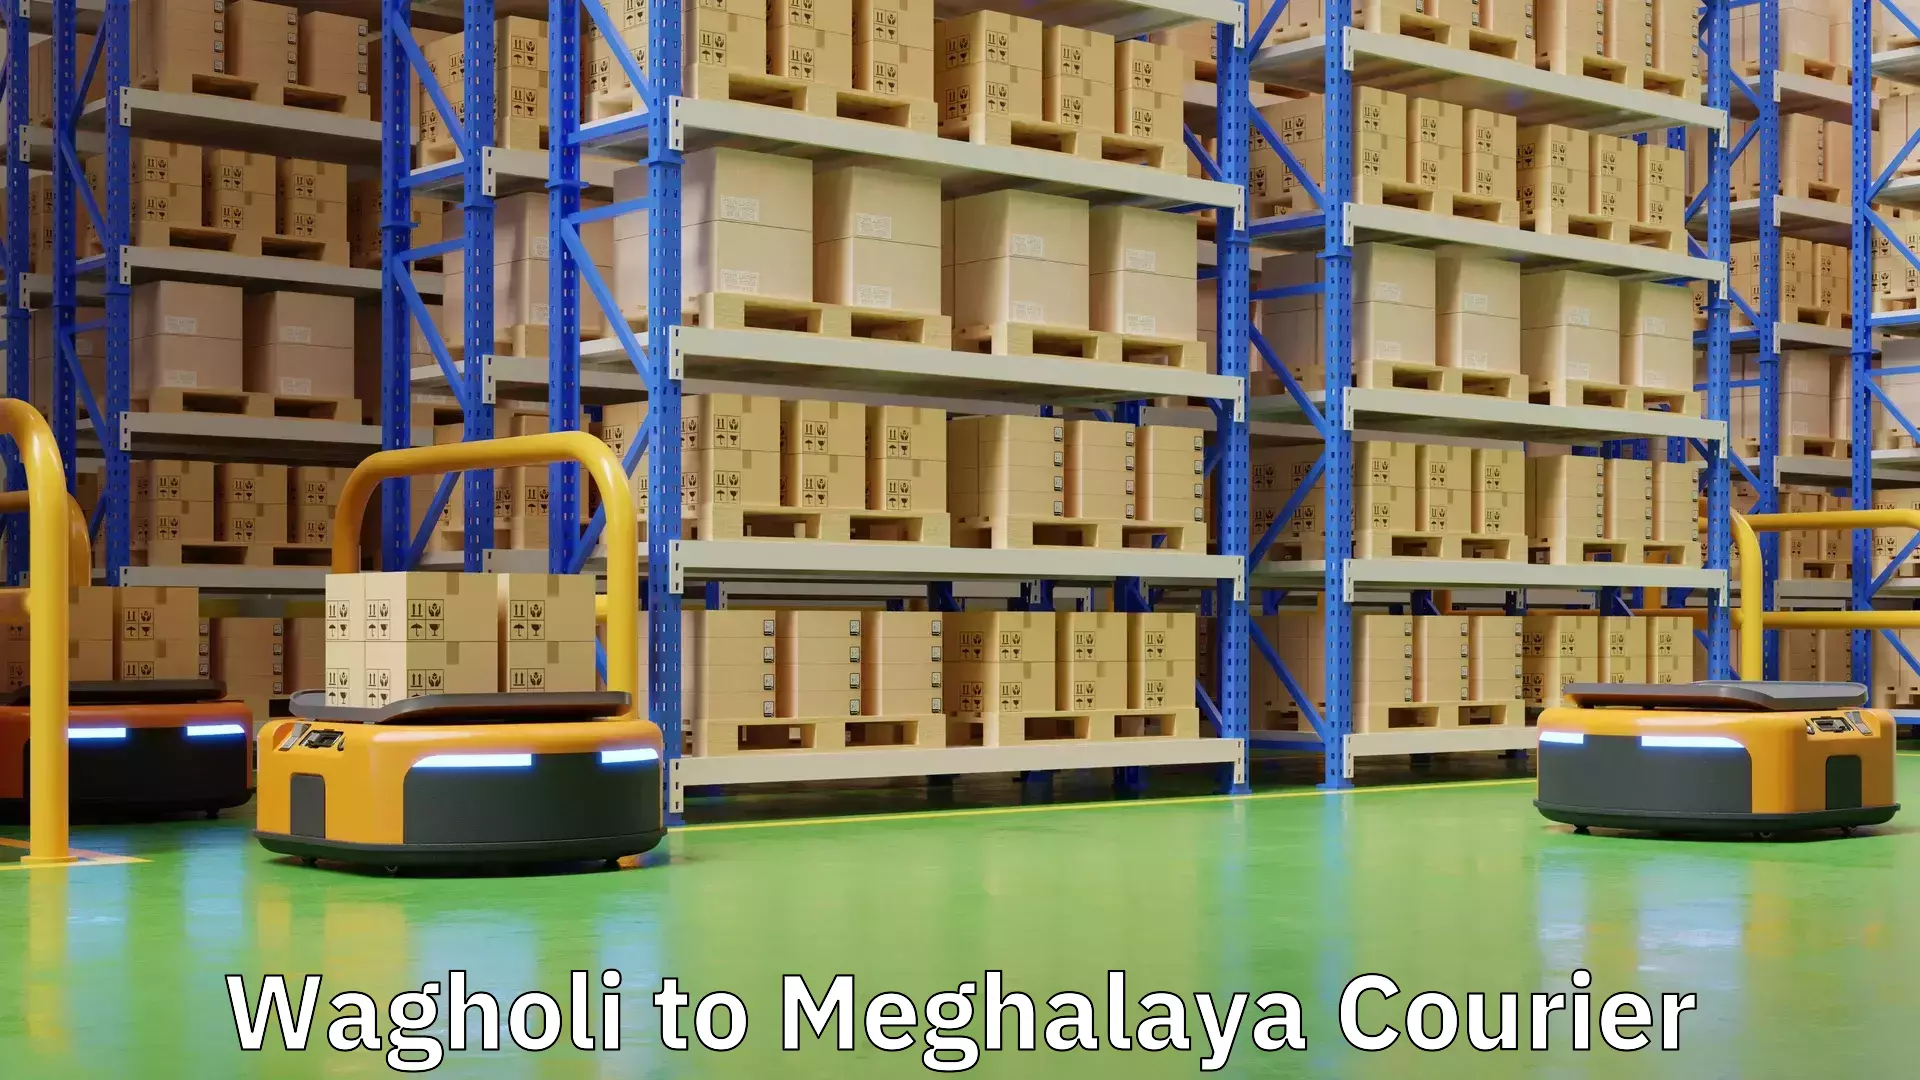 Ocean freight courier Wagholi to Meghalaya